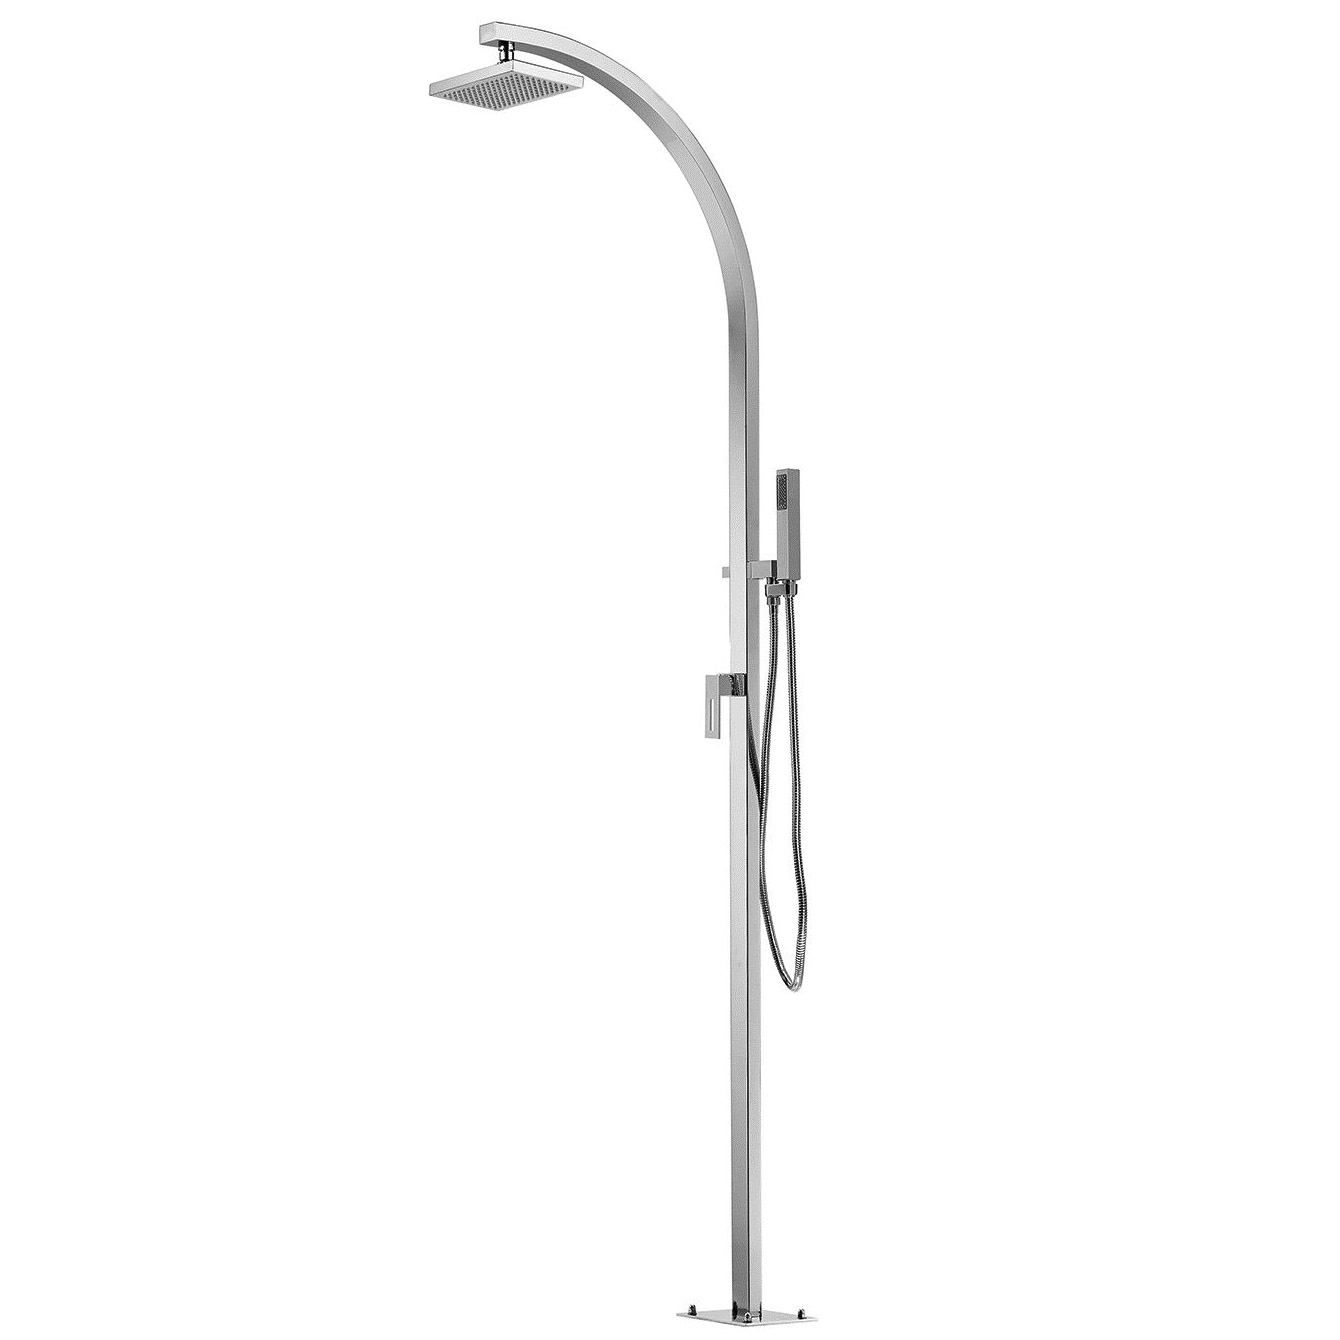 Arko Q53 316 Marine Grade Stainless Steel Free Standing Hot and Cold Shower Column with Hand Spray